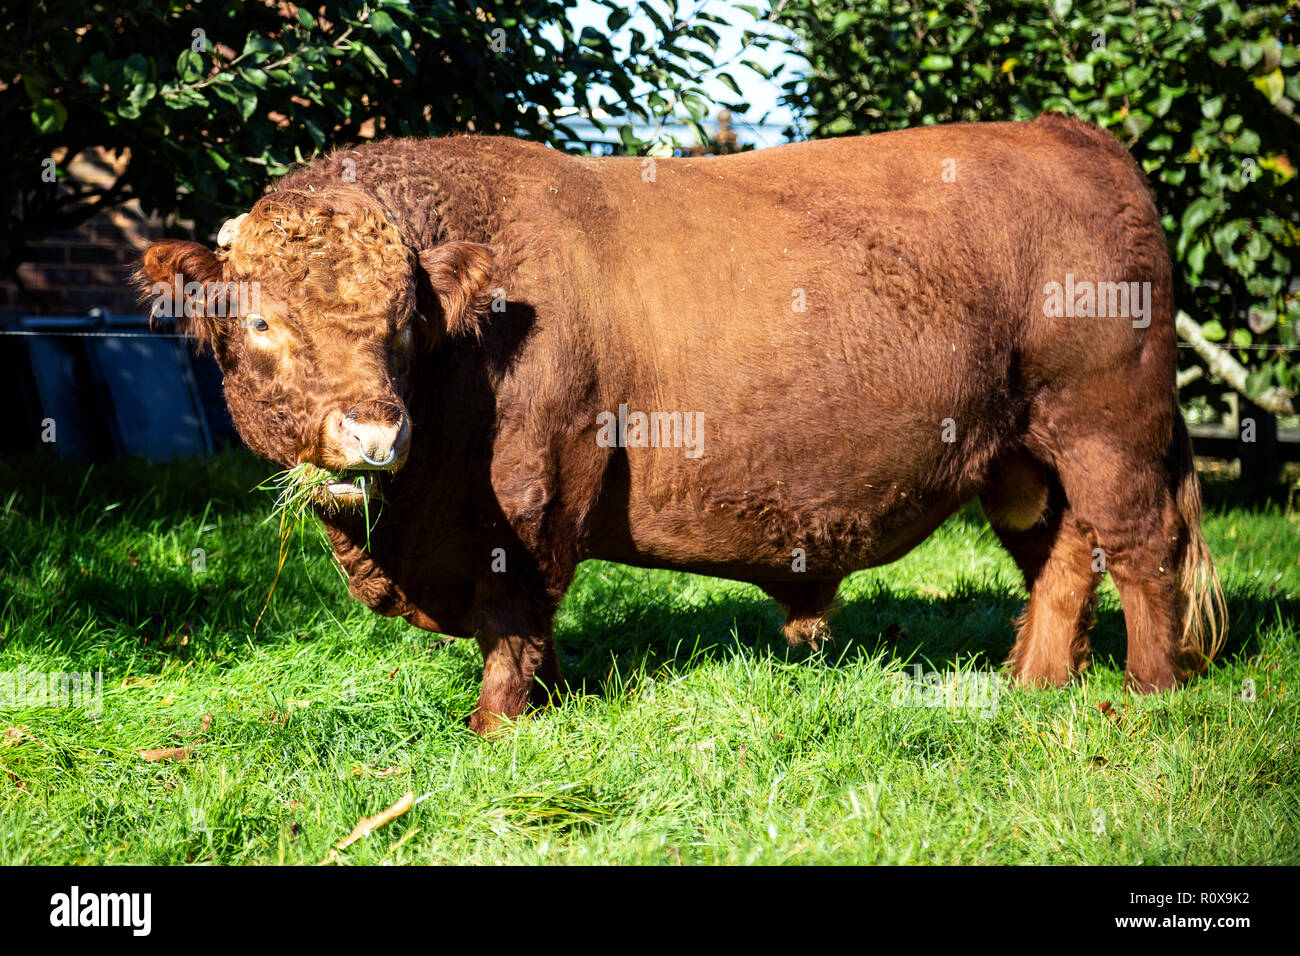 Dexter Bull - Animal, Cattle, Agriculture, Animal, Animal Behavior, Beef, Brown, Cow, Dairy Product, England, Europe, Farm, Field, Horizontal, Horned, Stock Photo